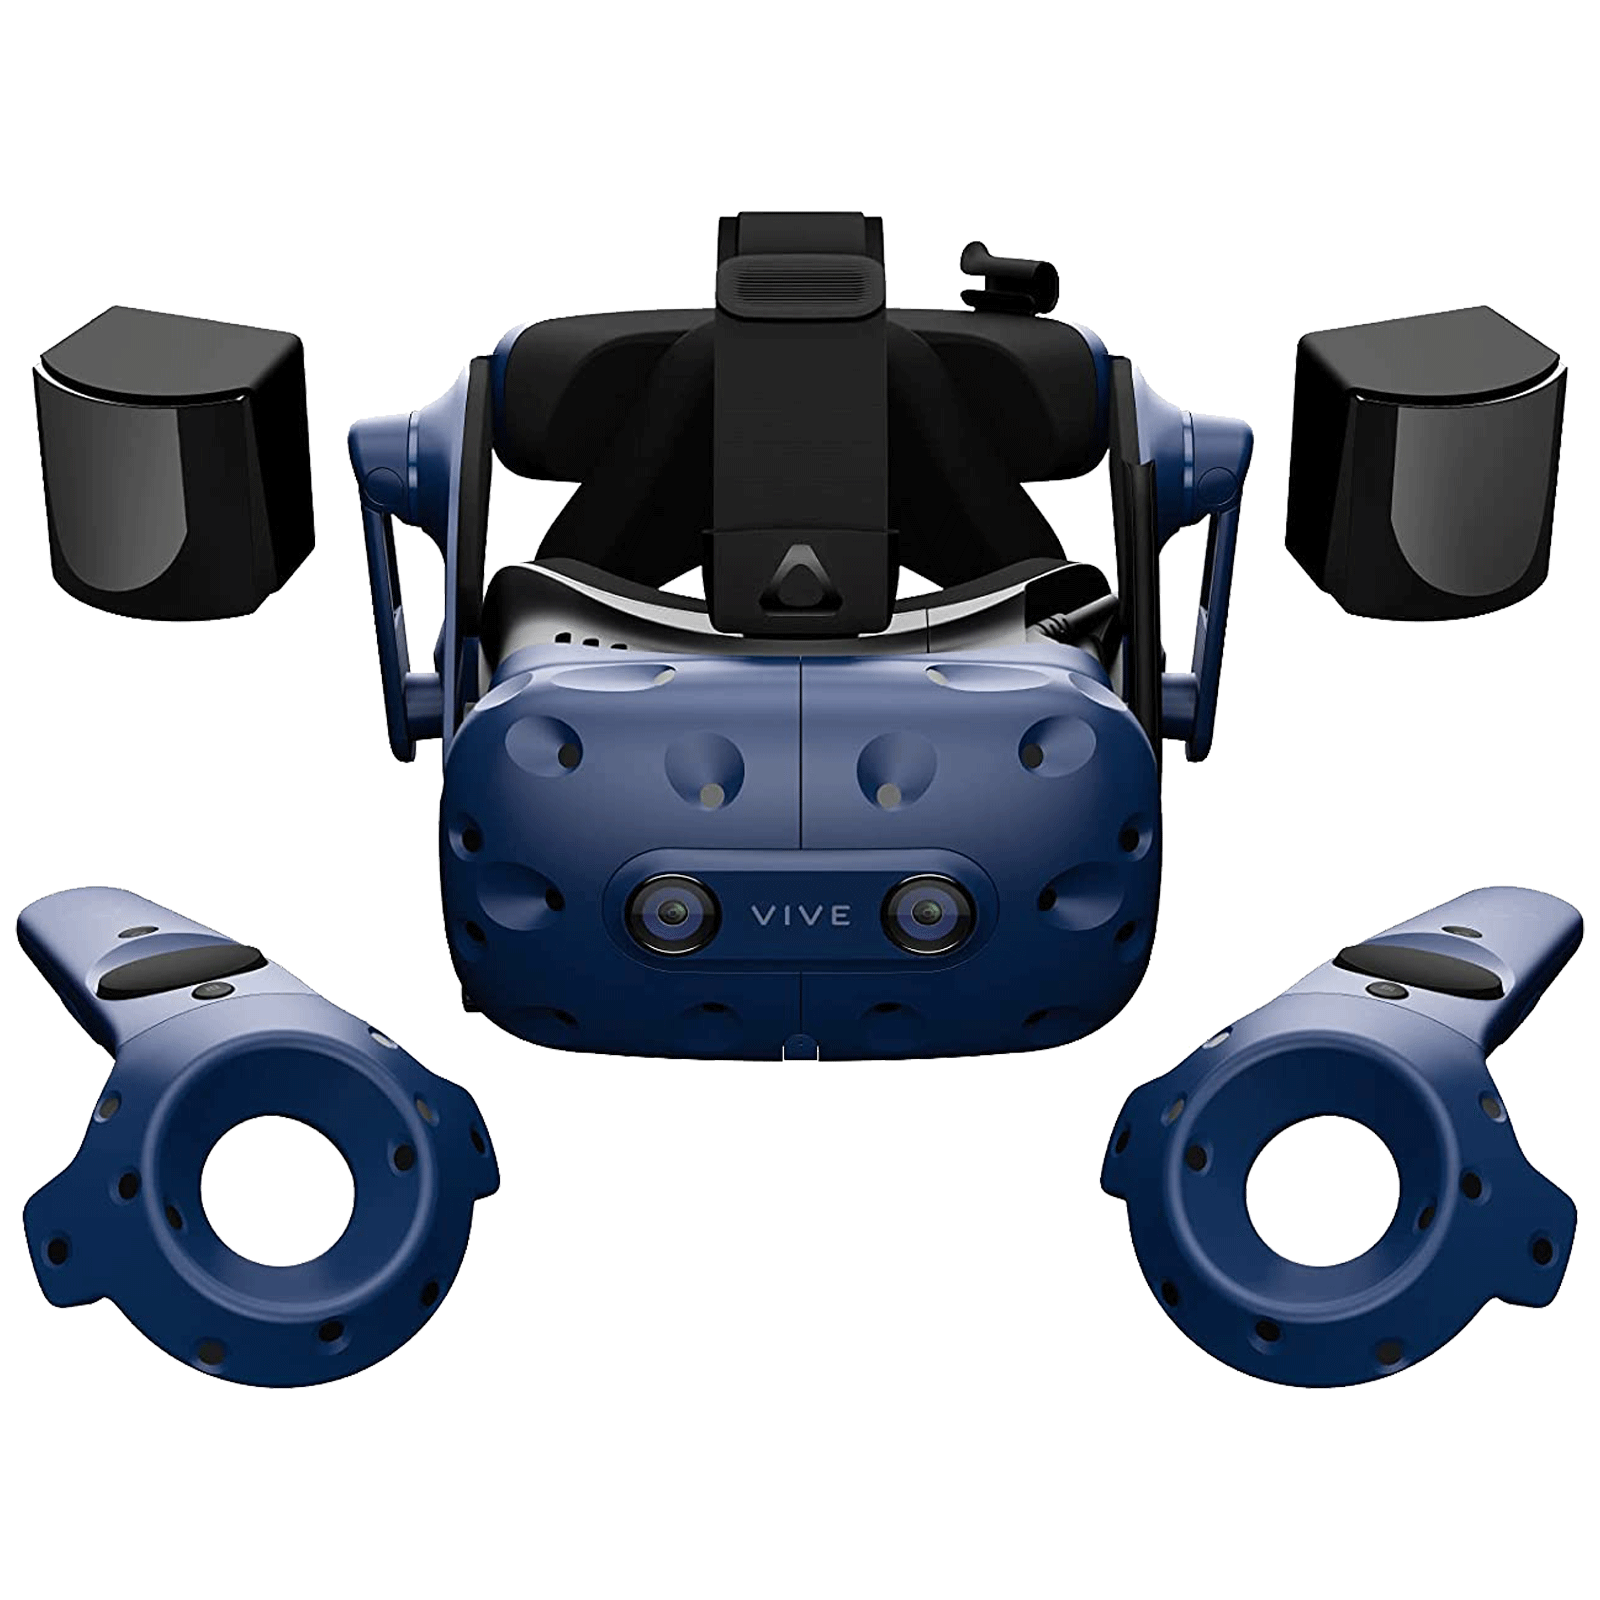 HTC VIVE Pro Virtual Reality Headset (Realistic Movement & Actions, 99HANW015-00, Blue)